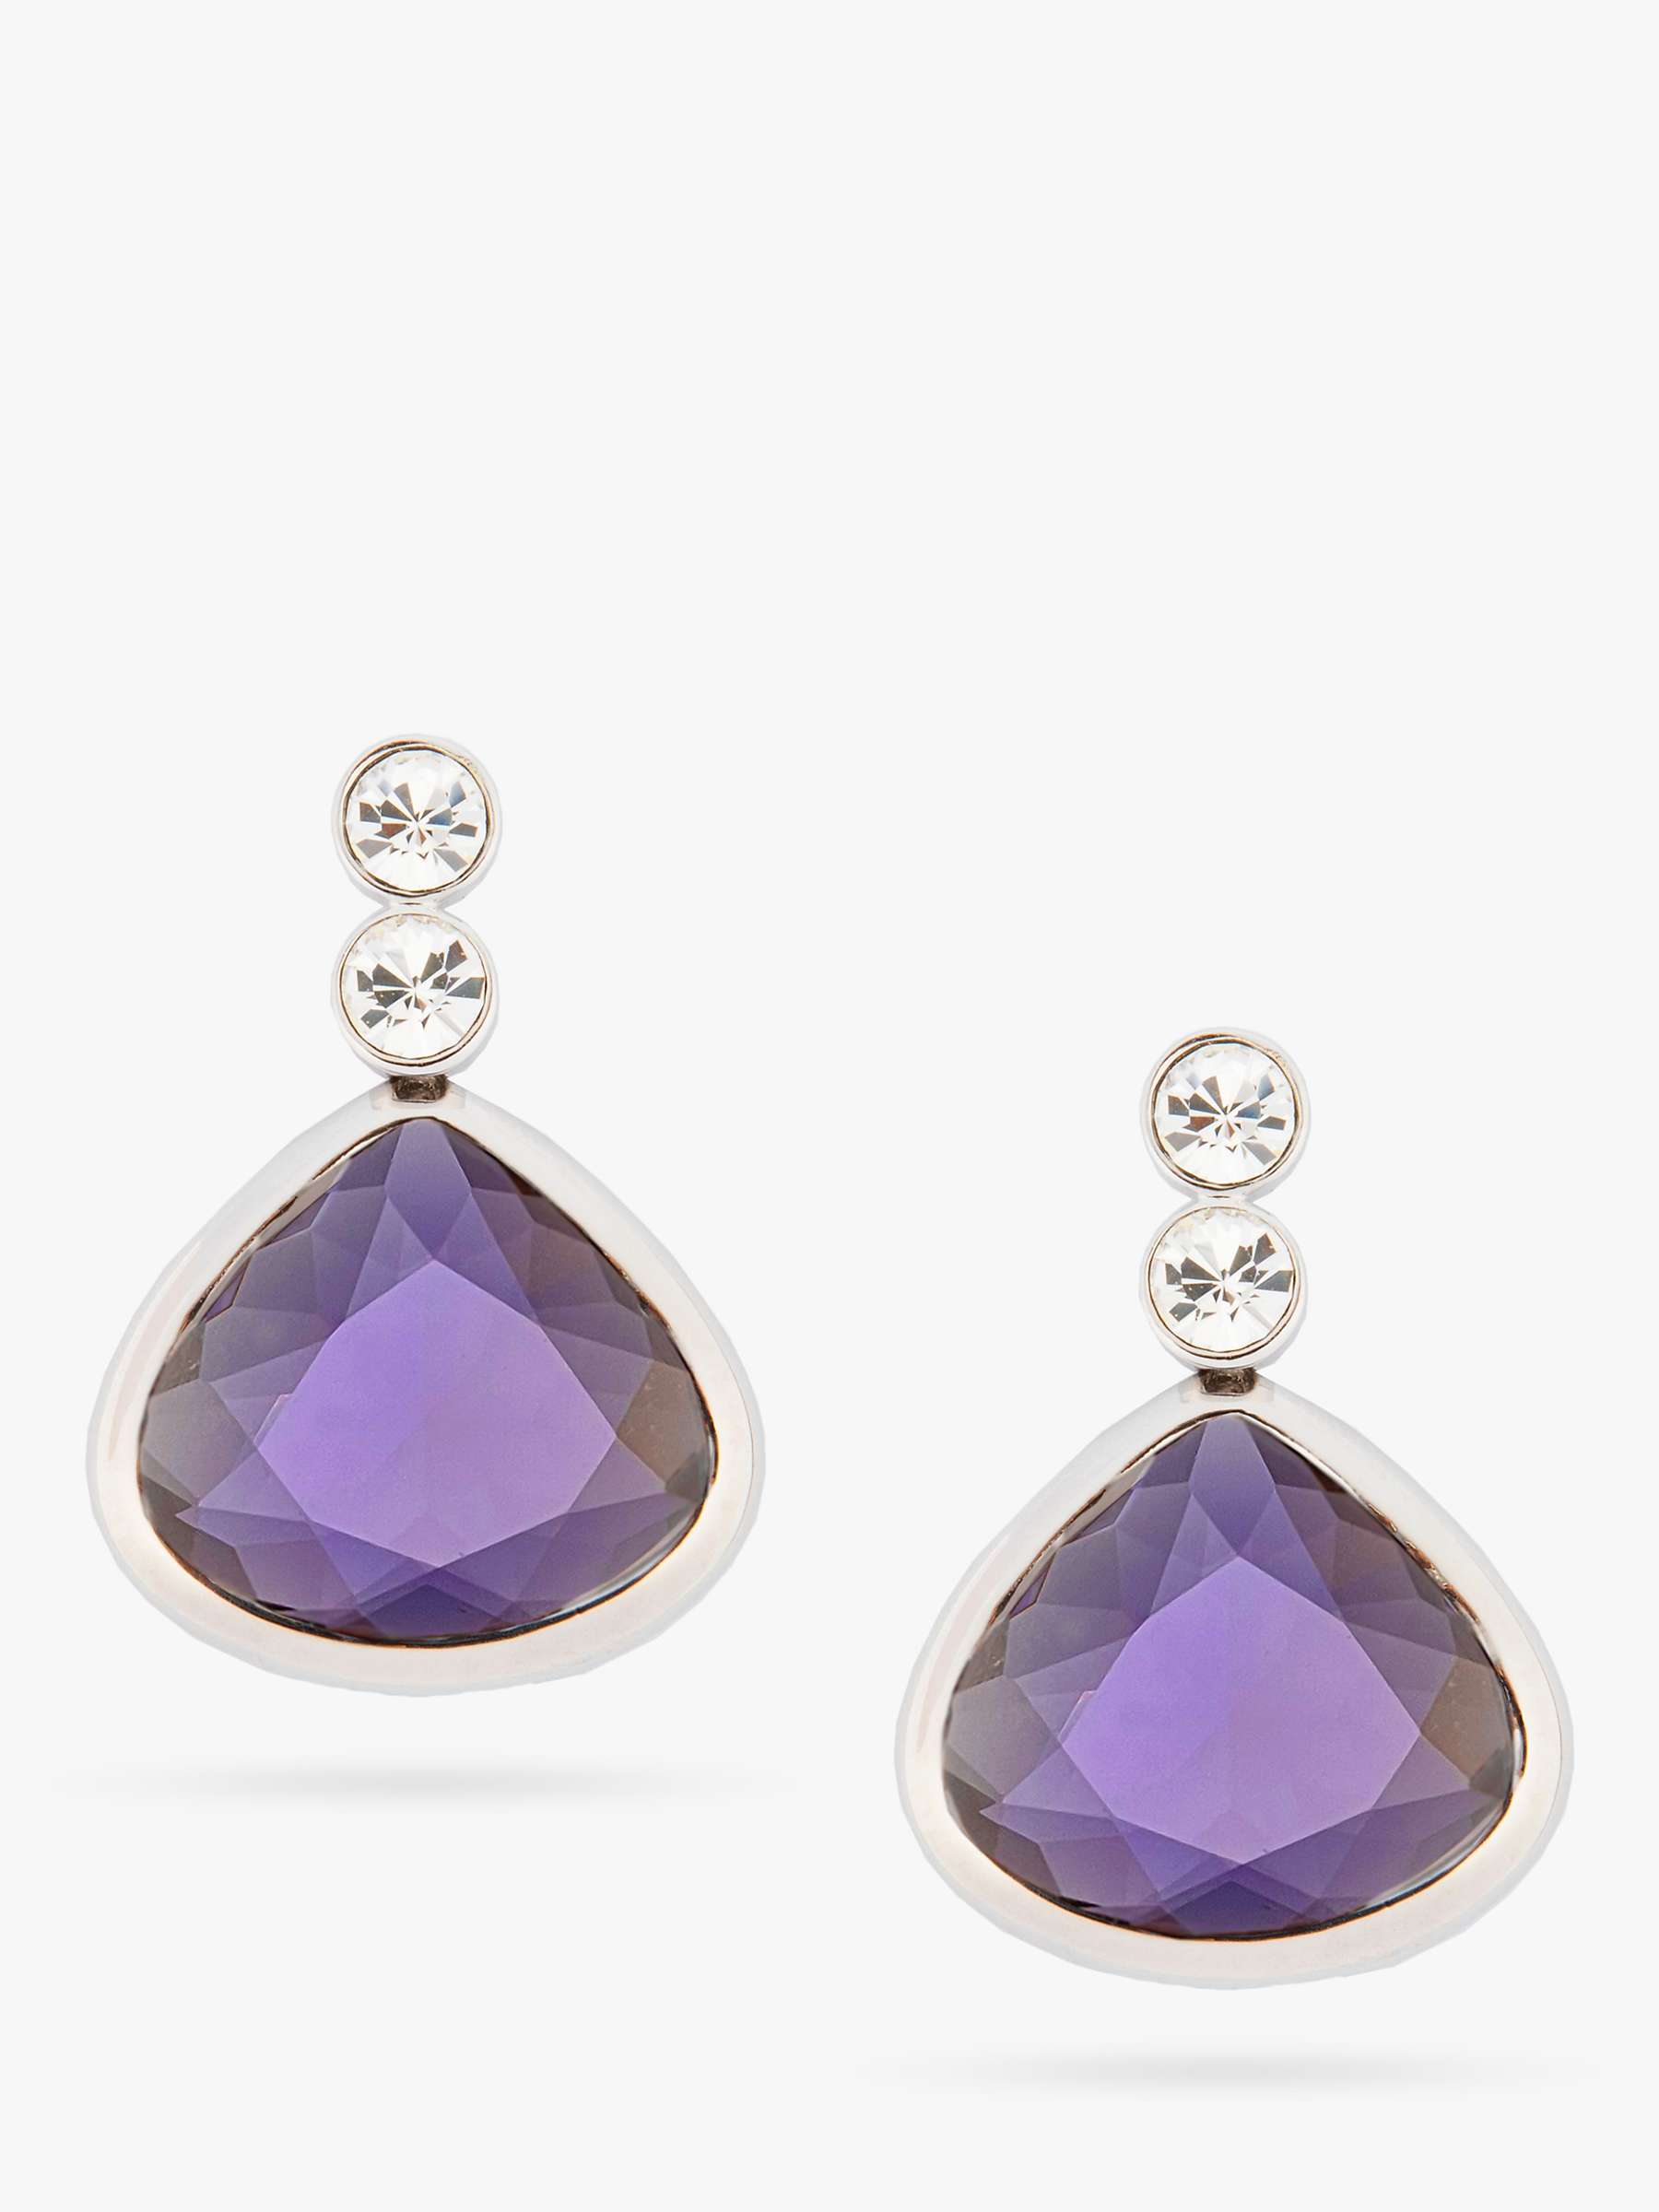 Buy Eclectica Vintage Swarovski Crystals Drop Earrings, Silver/Lilac Online at johnlewis.com